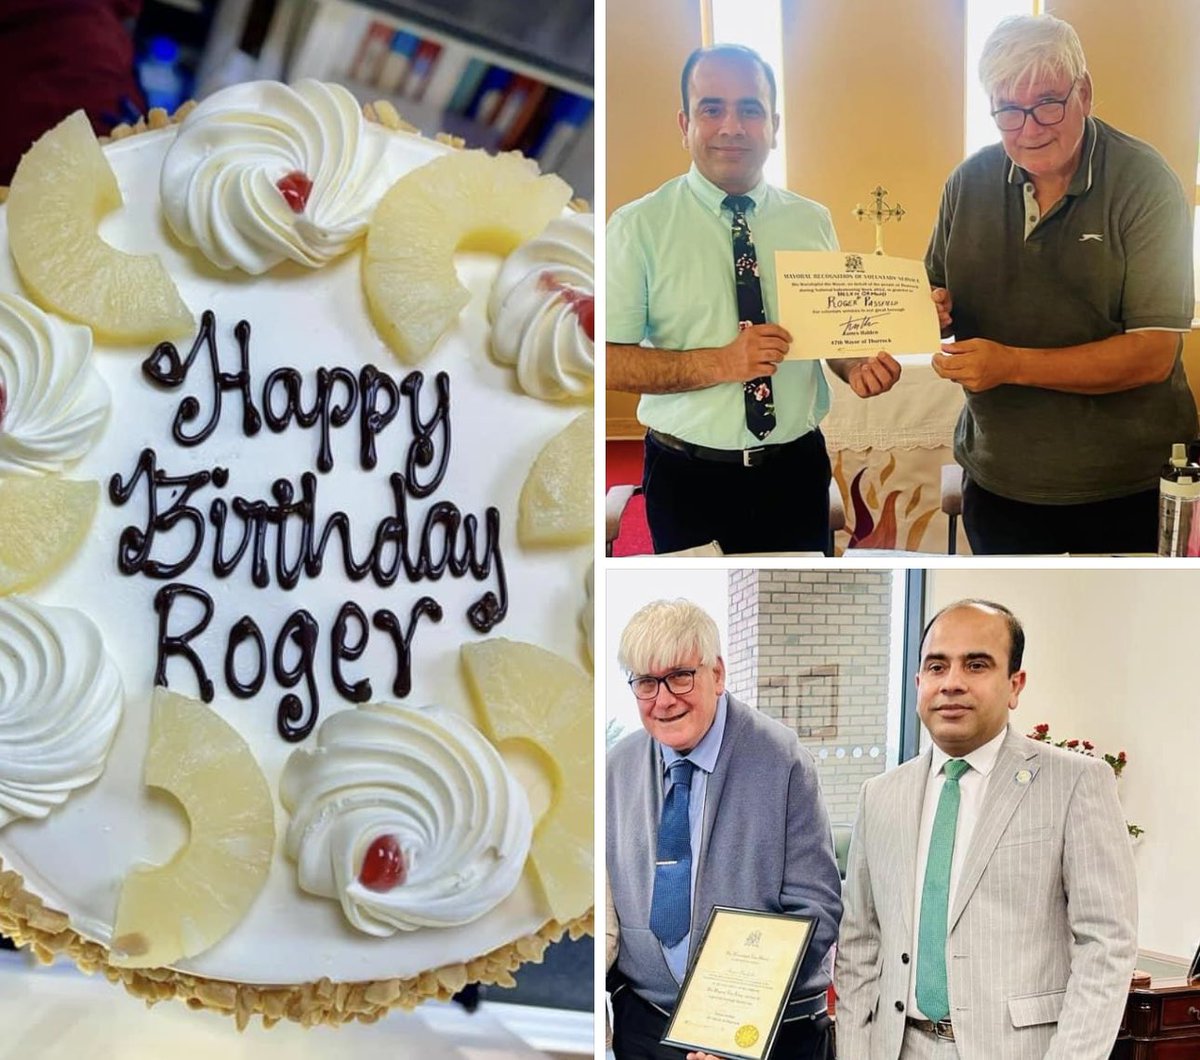 Happy Birthday Roger 🎂 Roger Passfield is local residents’ forum chair. He has been inducted into Mayoral Roll of honour & received a special recognition certificate from Mayor of Thurrock on my recommendation. #IValueYou #YouAreMyPriority